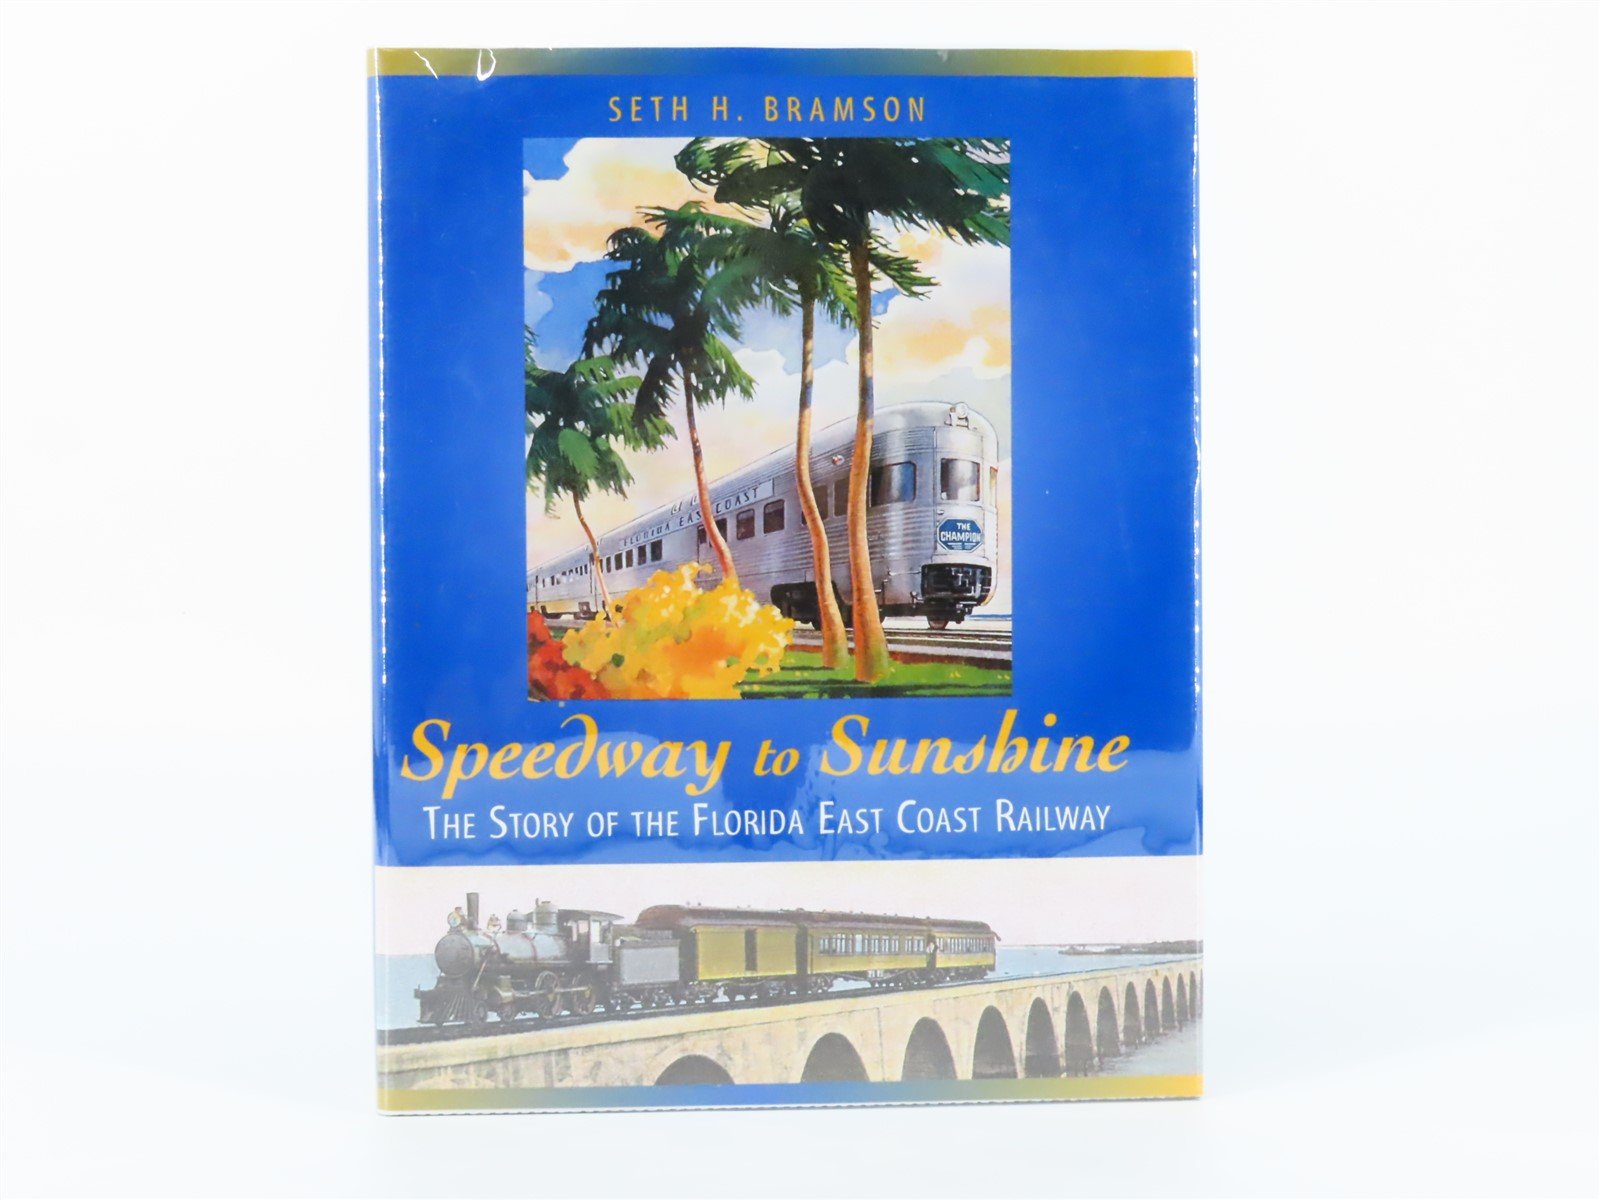 Speedway to Sunshine - The Story Of The FEC Railway by S. Bramson ©2003 HC Book